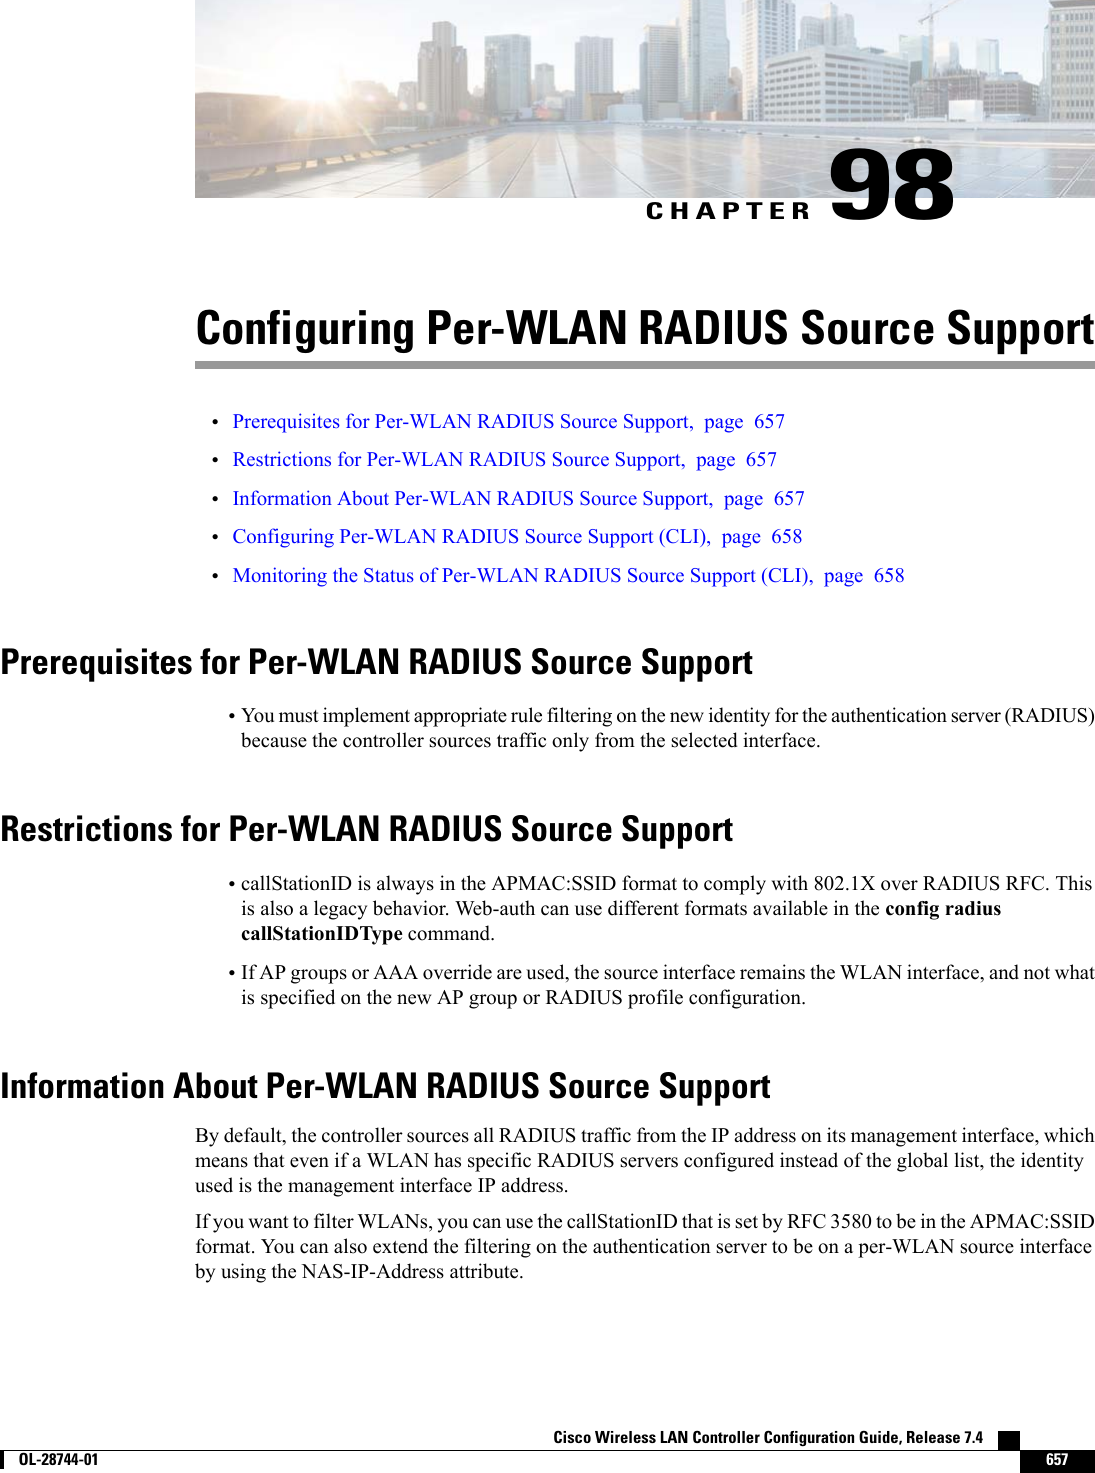 CHAPTER 98Configuring Per-WLAN RADIUS Source Support•Prerequisites for Per-WLAN RADIUS Source Support, page 657•Restrictions for Per-WLAN RADIUS Source Support, page 657•Information About Per-WLAN RADIUS Source Support, page 657•Configuring Per-WLAN RADIUS Source Support (CLI), page 658•Monitoring the Status of Per-WLAN RADIUS Source Support (CLI), page 658Prerequisites for Per-WLAN RADIUS Source Support•You must implement appropriate rule filtering on the new identity for the authentication server (RADIUS)because the controller sources traffic only from the selected interface.Restrictions for Per-WLAN RADIUS Source Support•callStationID is always in the APMAC:SSID format to comply with 802.1X over RADIUS RFC. Thisis also a legacy behavior. Web-auth can use different formats available in the config radiuscallStationIDType command.•If AP groups or AAA override are used, the source interface remains the WLAN interface, and not whatis specified on the new AP group or RADIUS profile configuration.Information About Per-WLAN RADIUS Source SupportBy default, the controller sources all RADIUS traffic from the IP address on its management interface, whichmeans that even if a WLAN has specific RADIUS servers configured instead of the global list, the identityused is the management interface IP address.If you want to filter WLANs, you can use the callStationID that is set by RFC 3580 to be in the APMAC:SSIDformat. You can also extend the filtering on the authentication server to be on a per-WLAN source interfaceby using the NAS-IP-Address attribute.Cisco Wireless LAN Controller Configuration Guide, Release 7.4        OL-28744-01 657